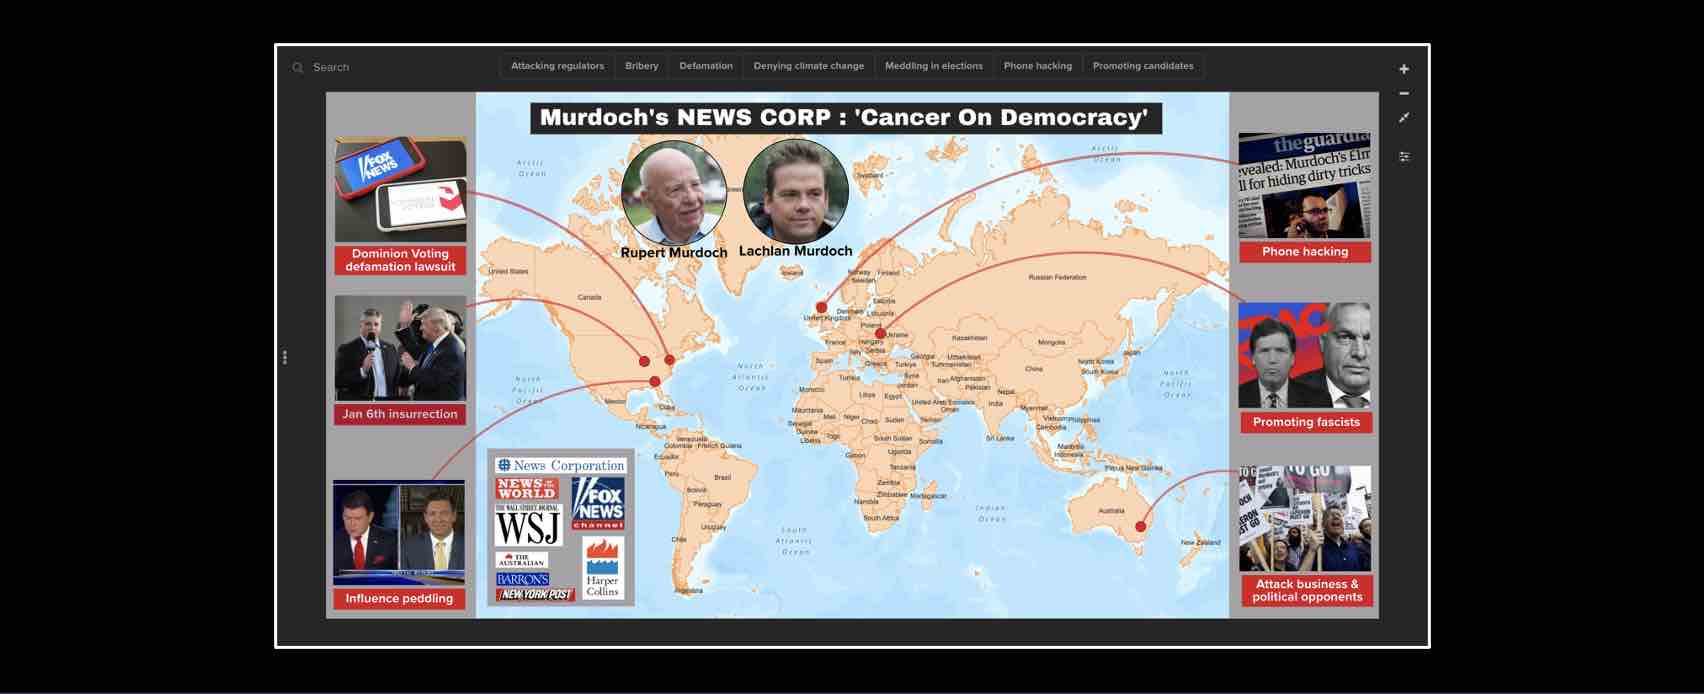 Murdoch's News Corp is cancer on democracy